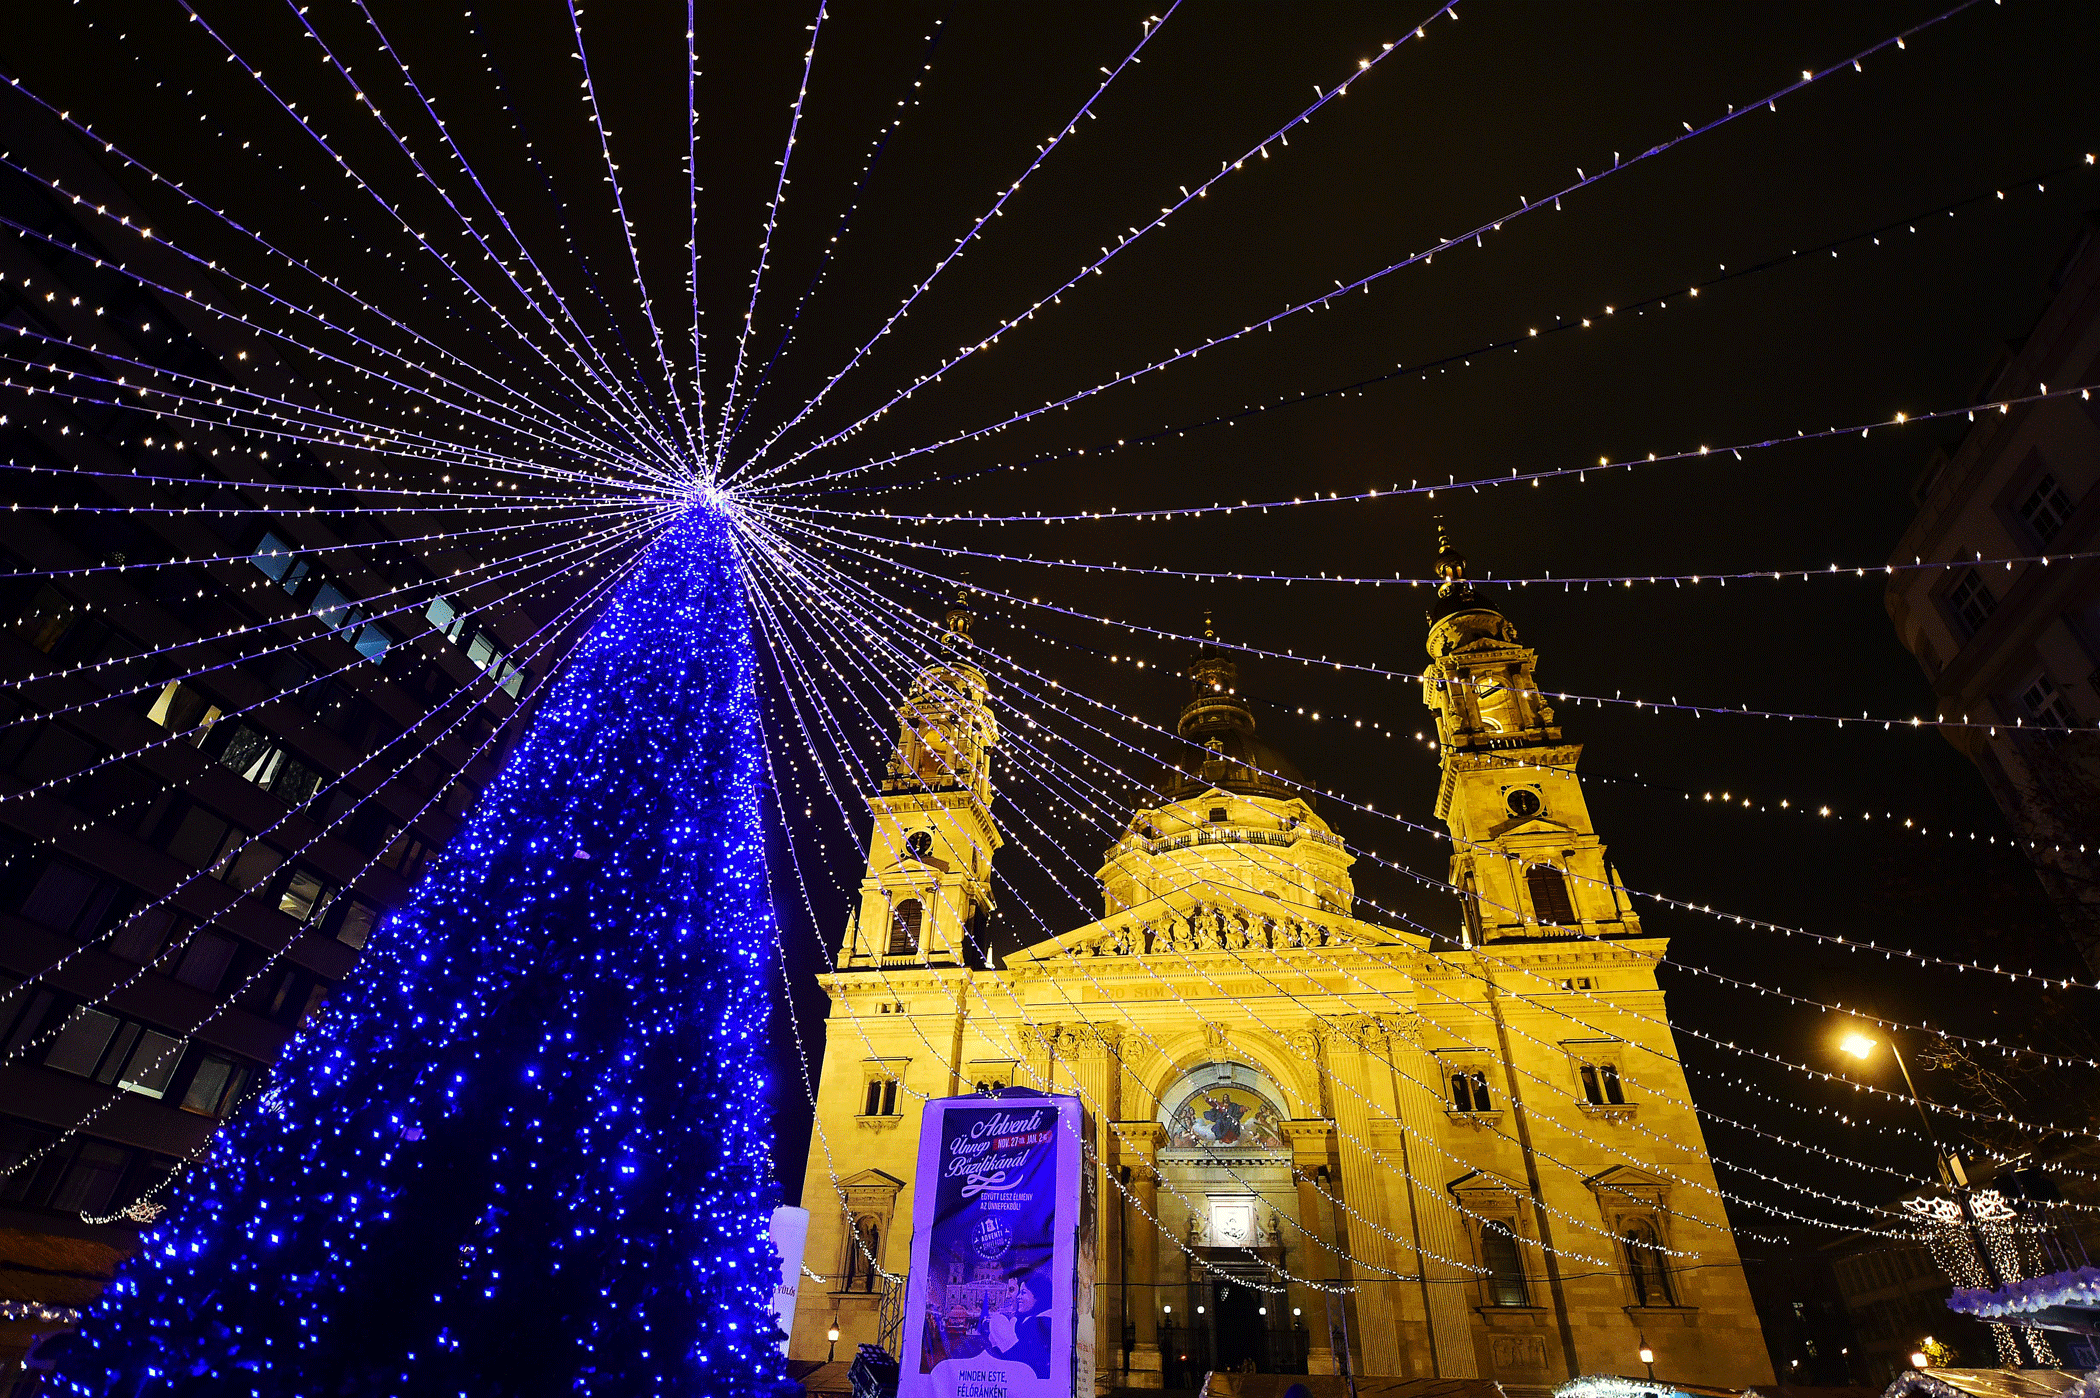 A Christmas tree is lit in front of the St, Stephan Basilica in Budapest on Dec. 21, 2015.